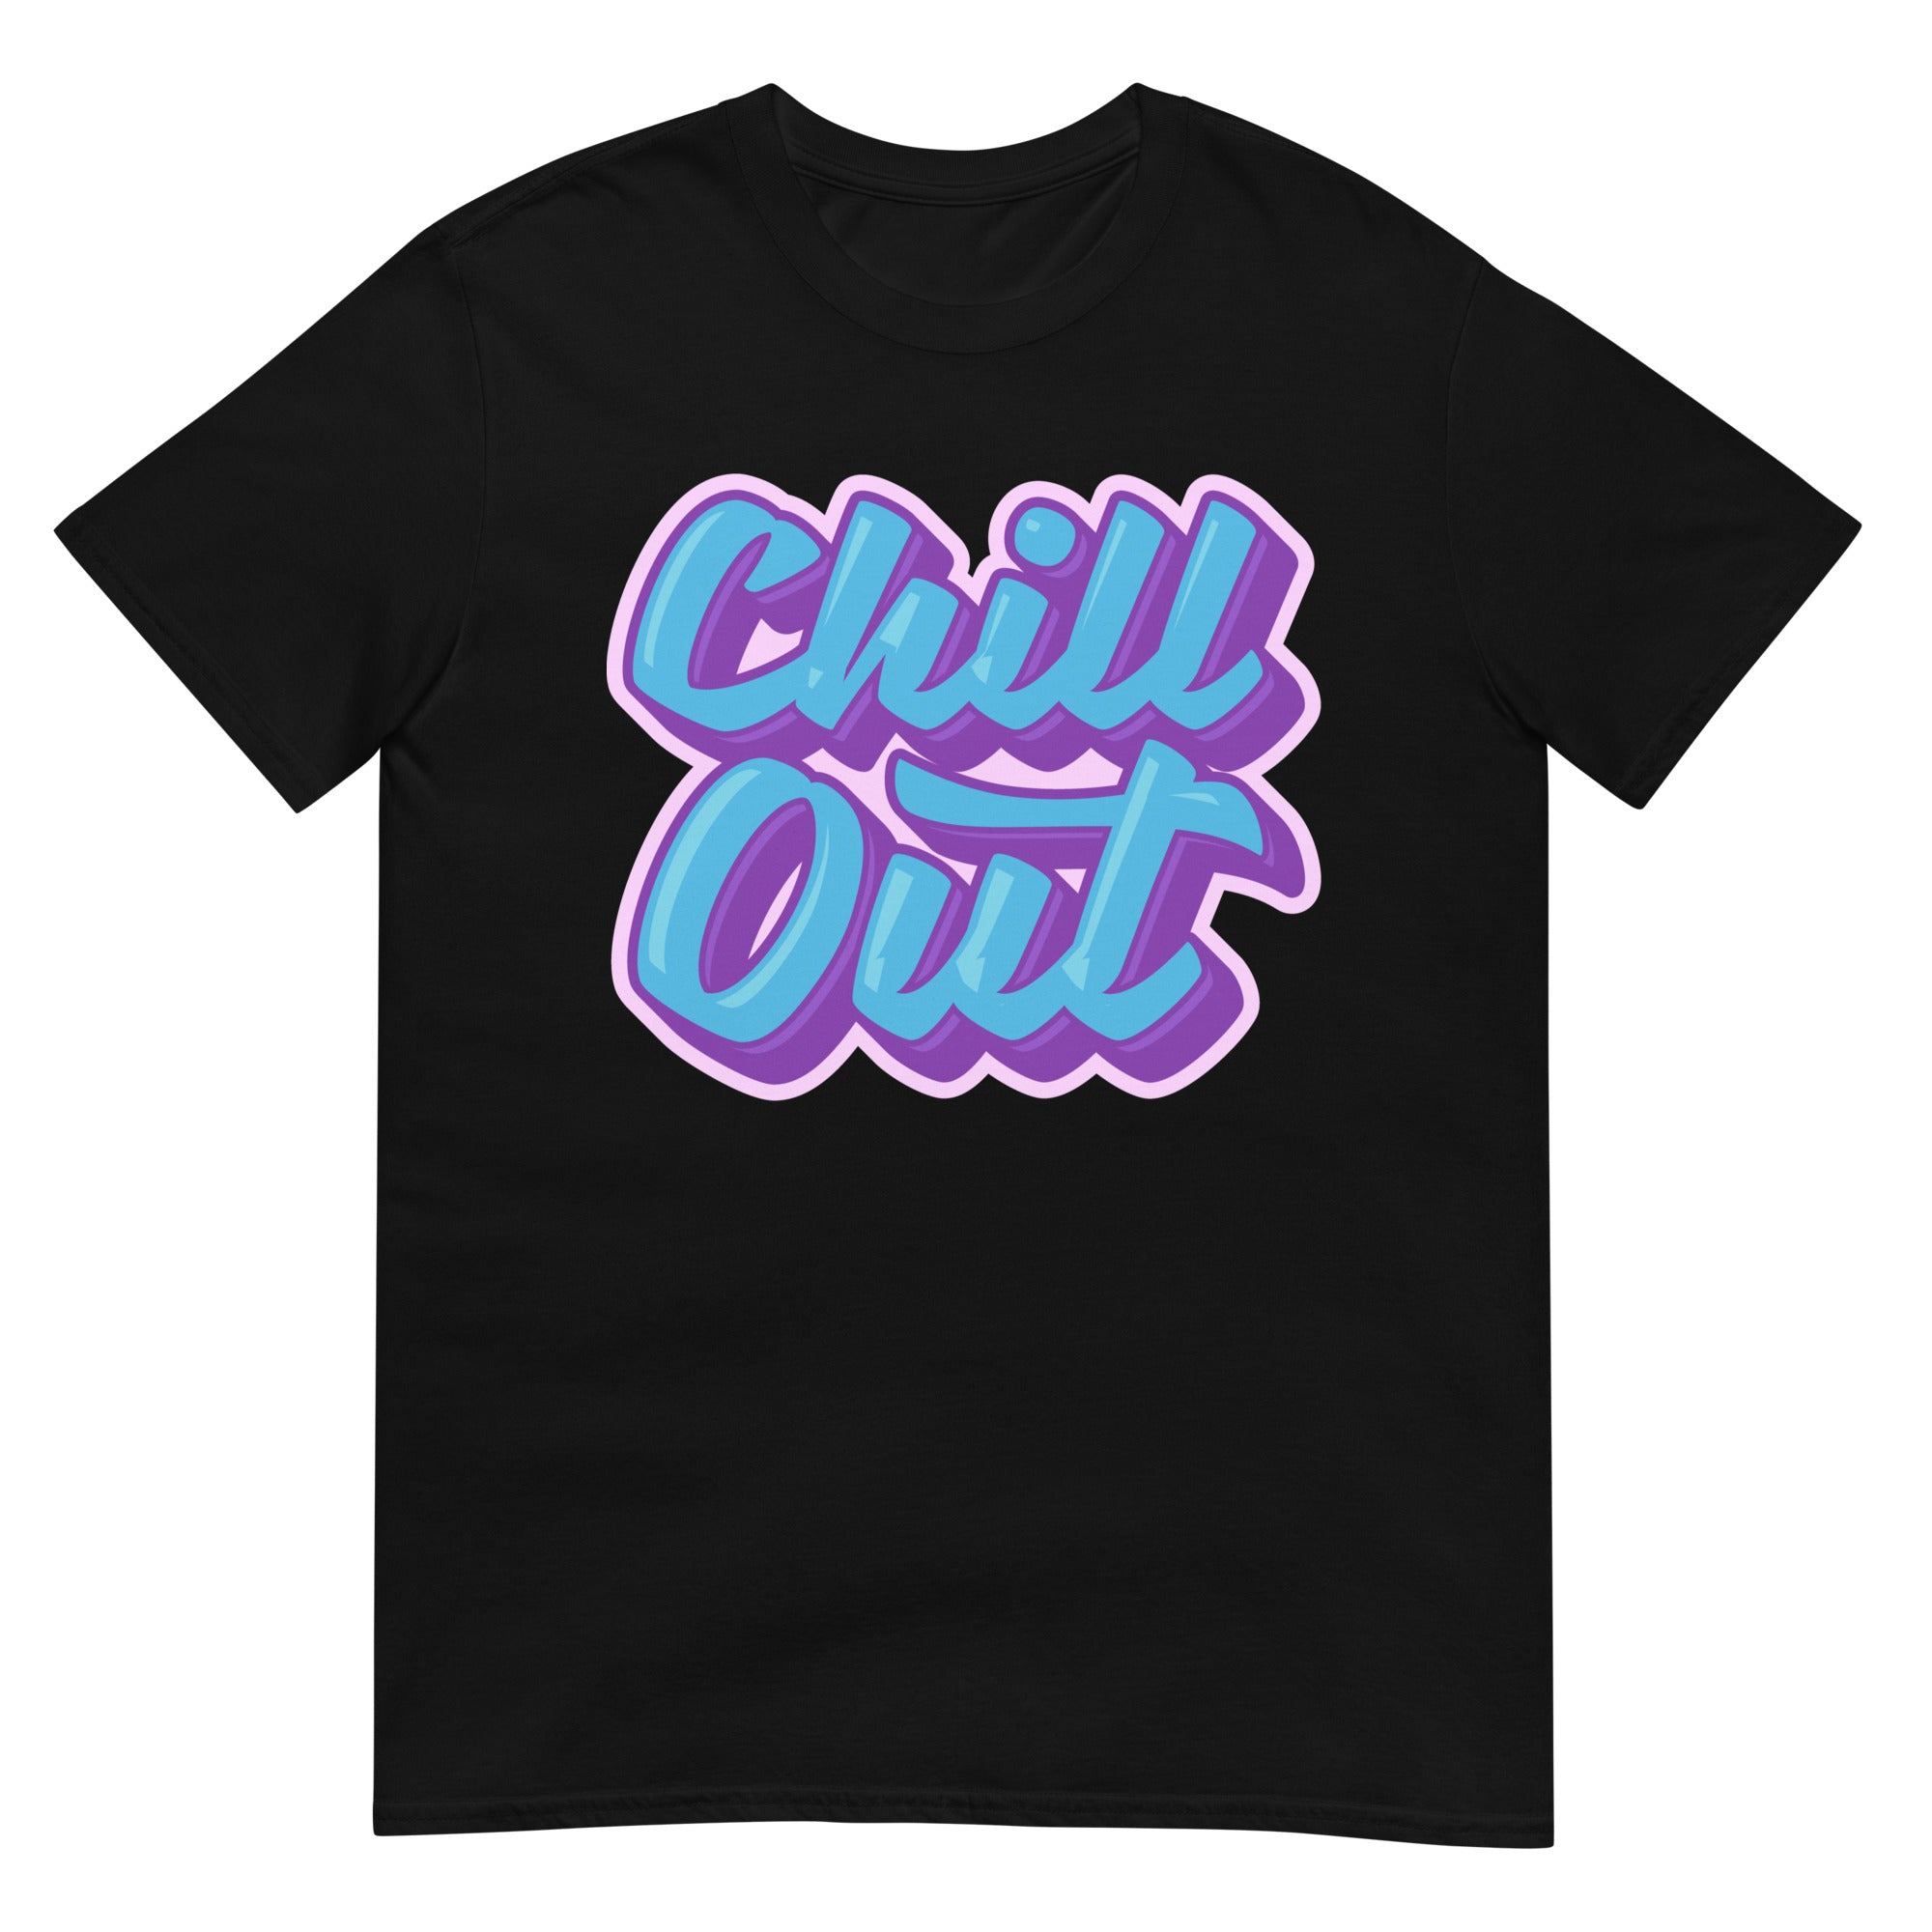 Chill Out - Short-Sleeve Unisex T-Shirt